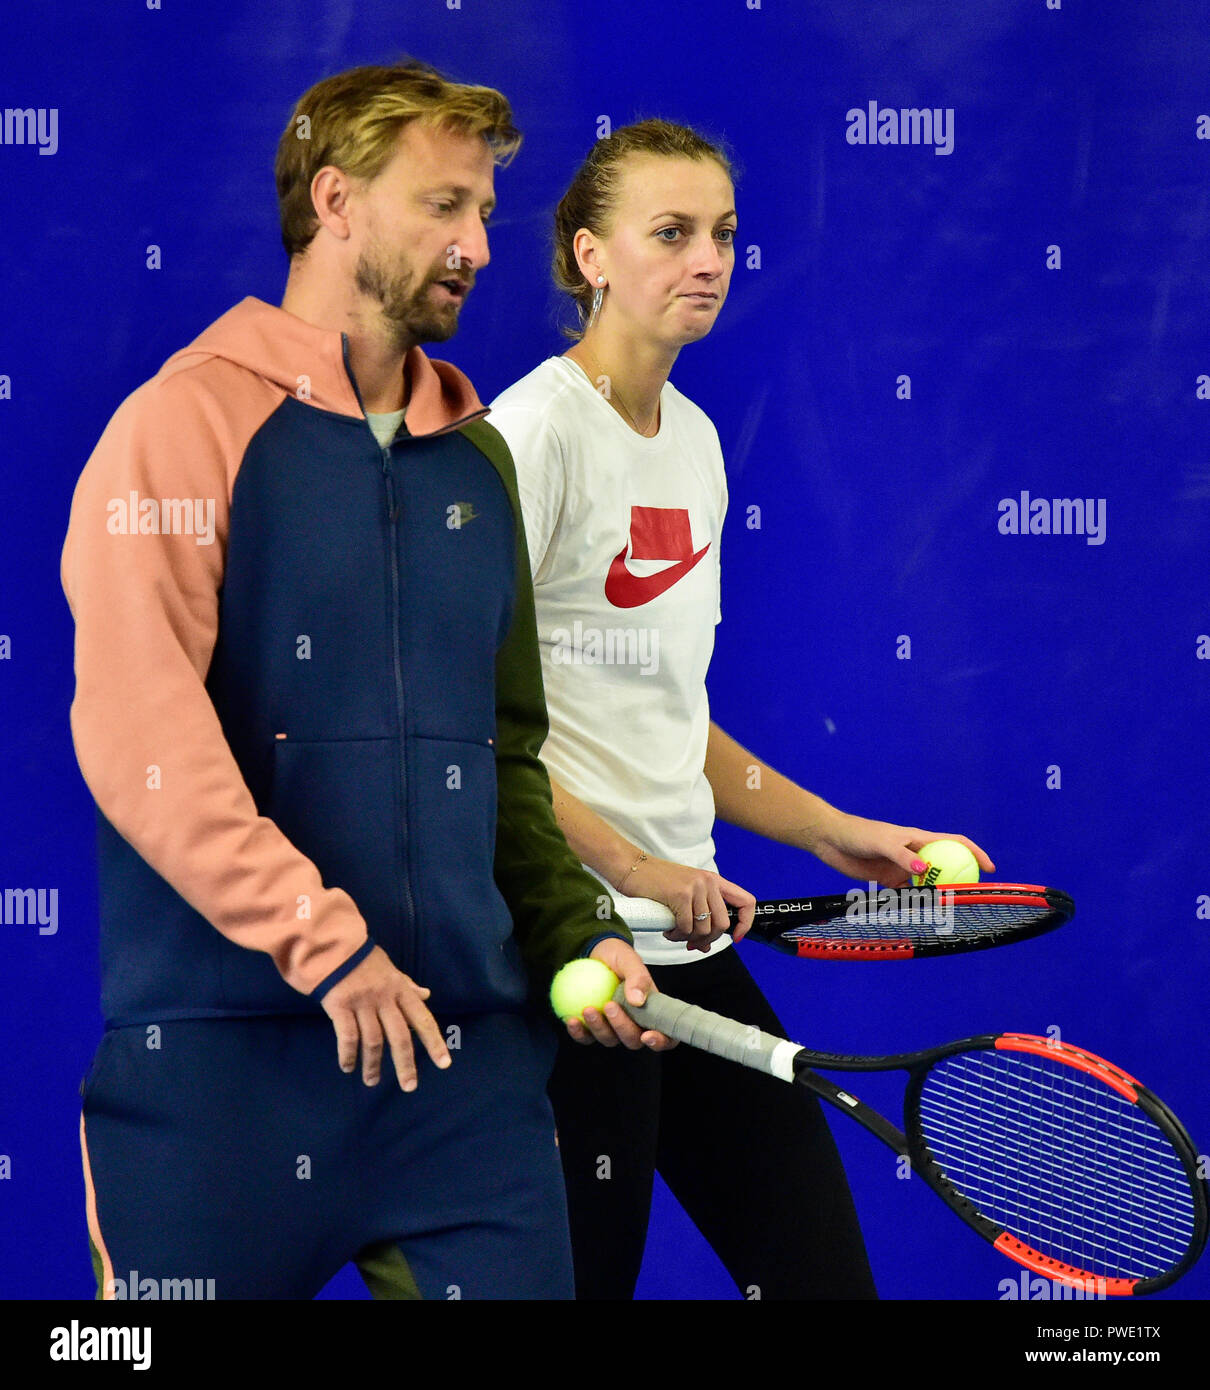 Prague, Czech Republic. 15th Oct, 2018. Czech tennis player Petra Kvitova  (right) and her coach Jiri Vanek are seen during a training session before  their departure to the WTA Finals, in Prague,